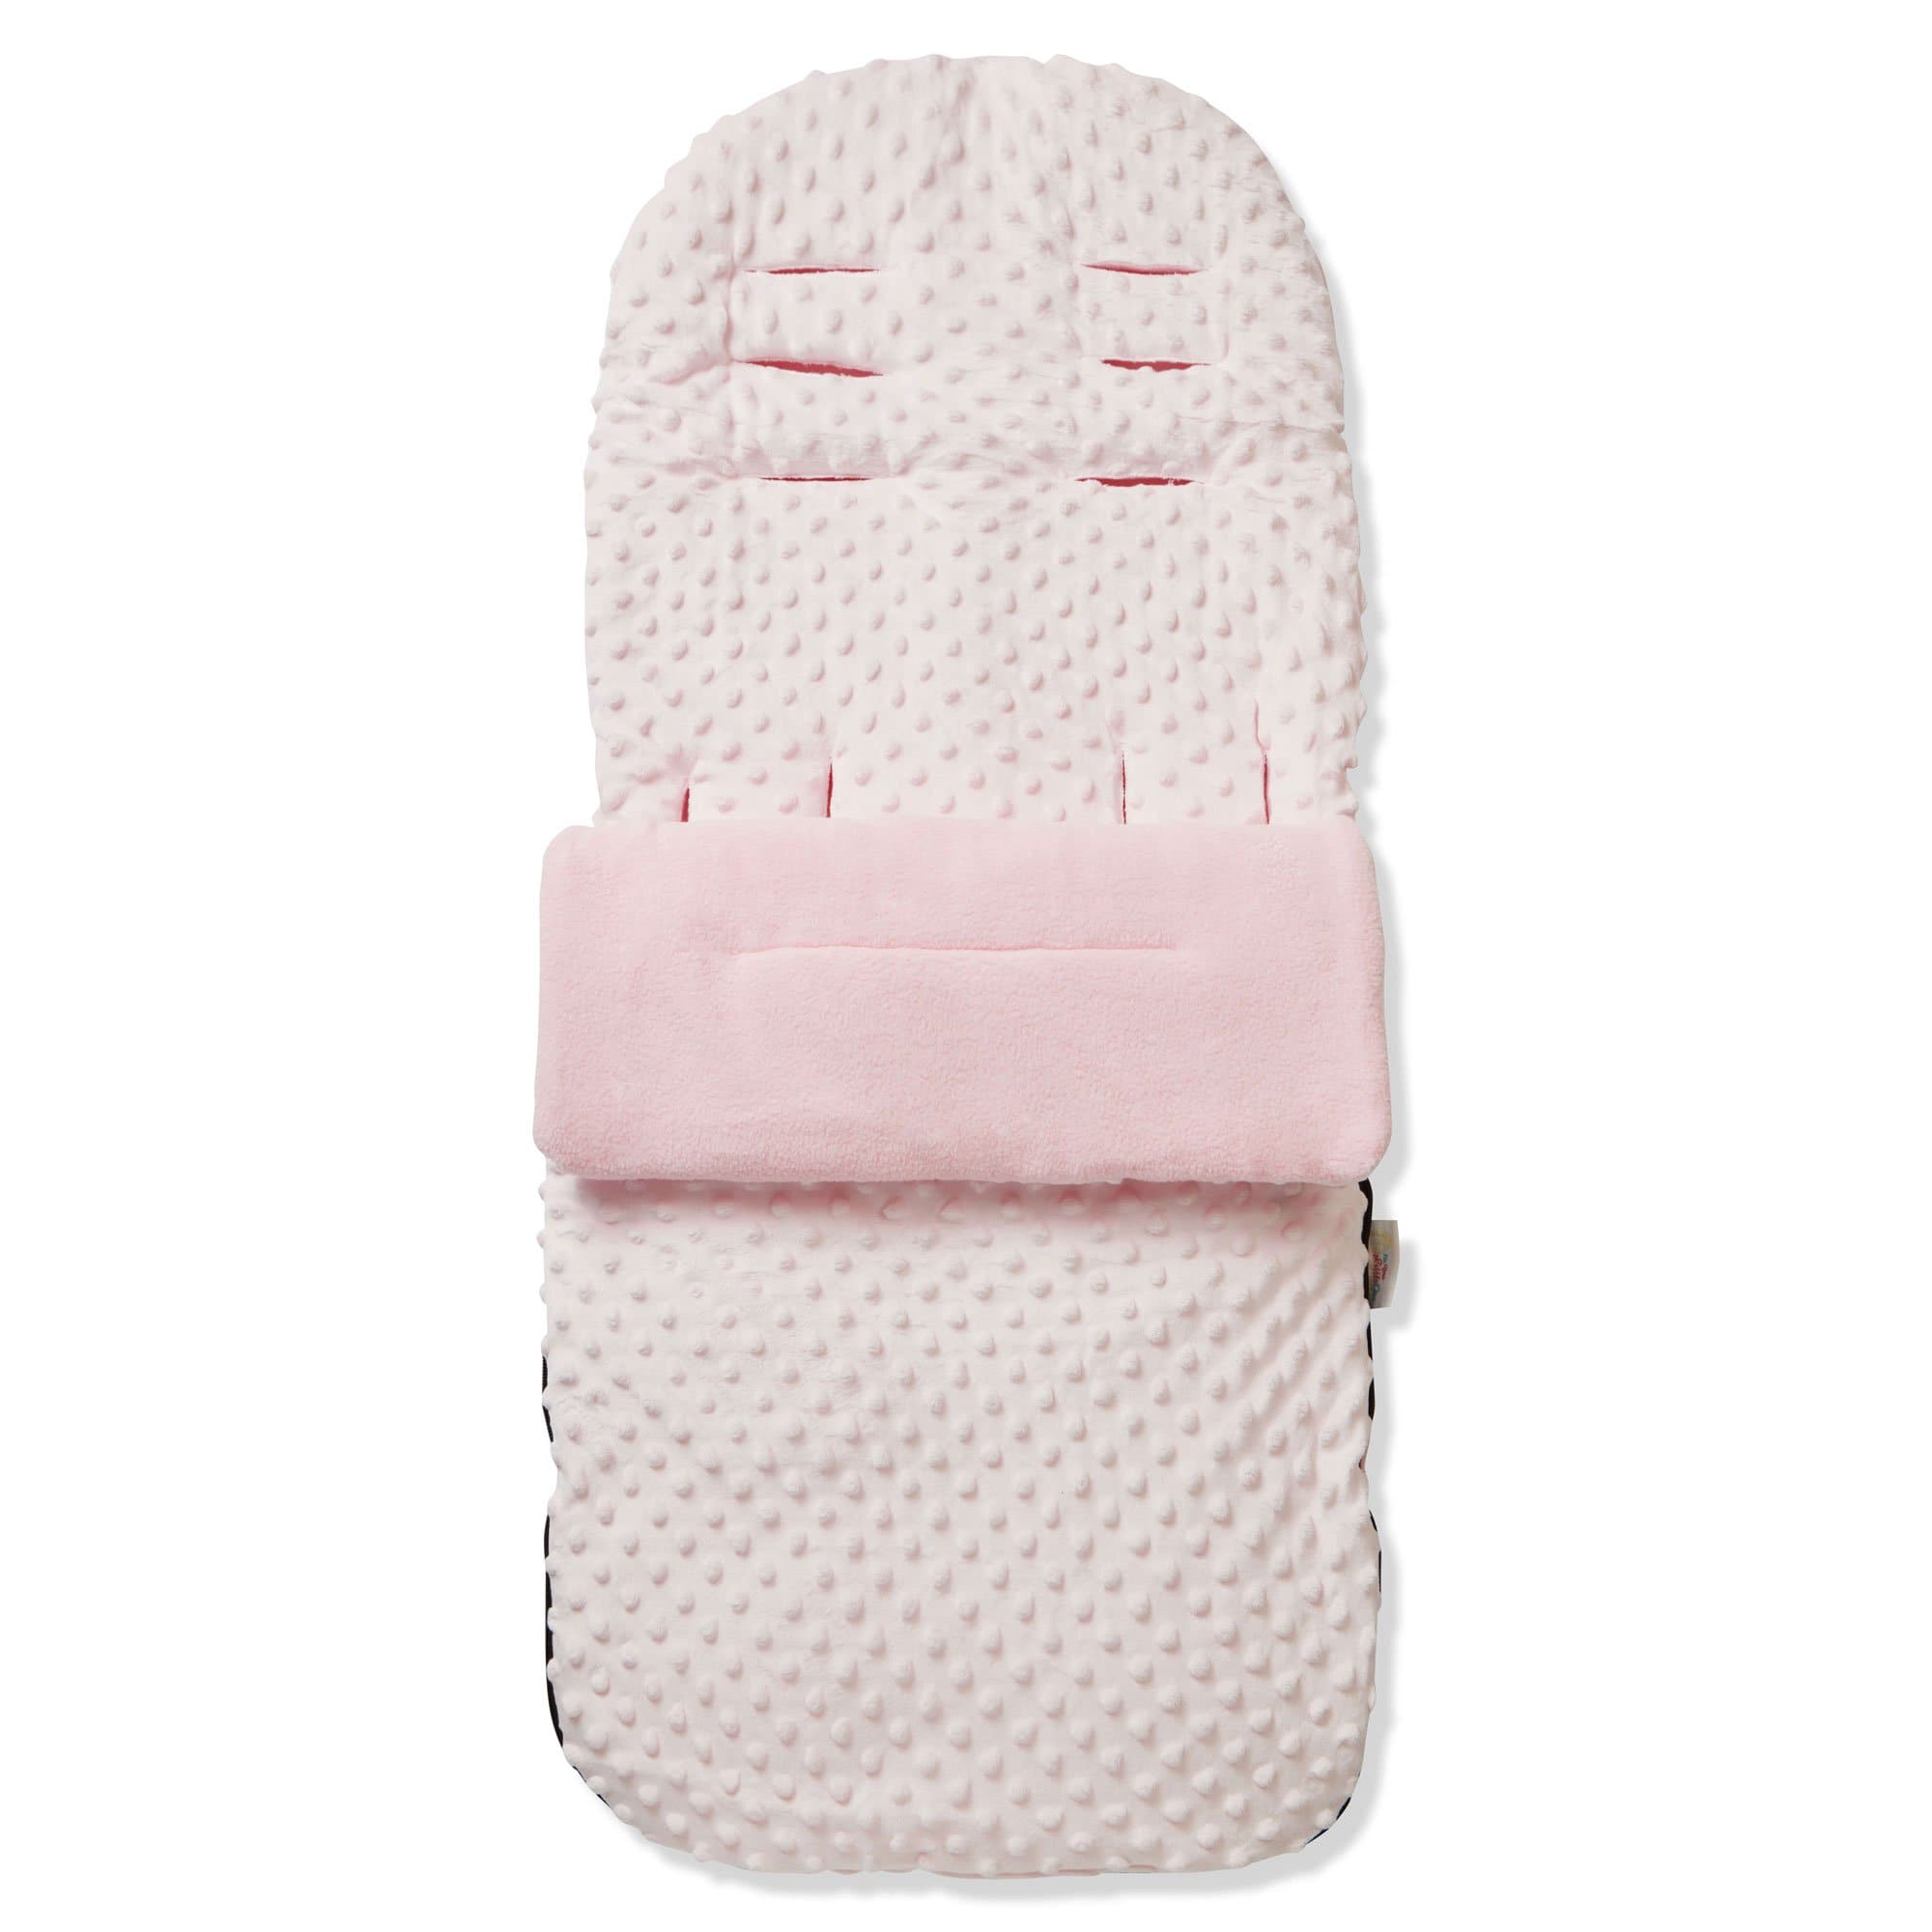 Dimple Footmuff / Cosy Toes Compatible with Greentom - For Your Little One